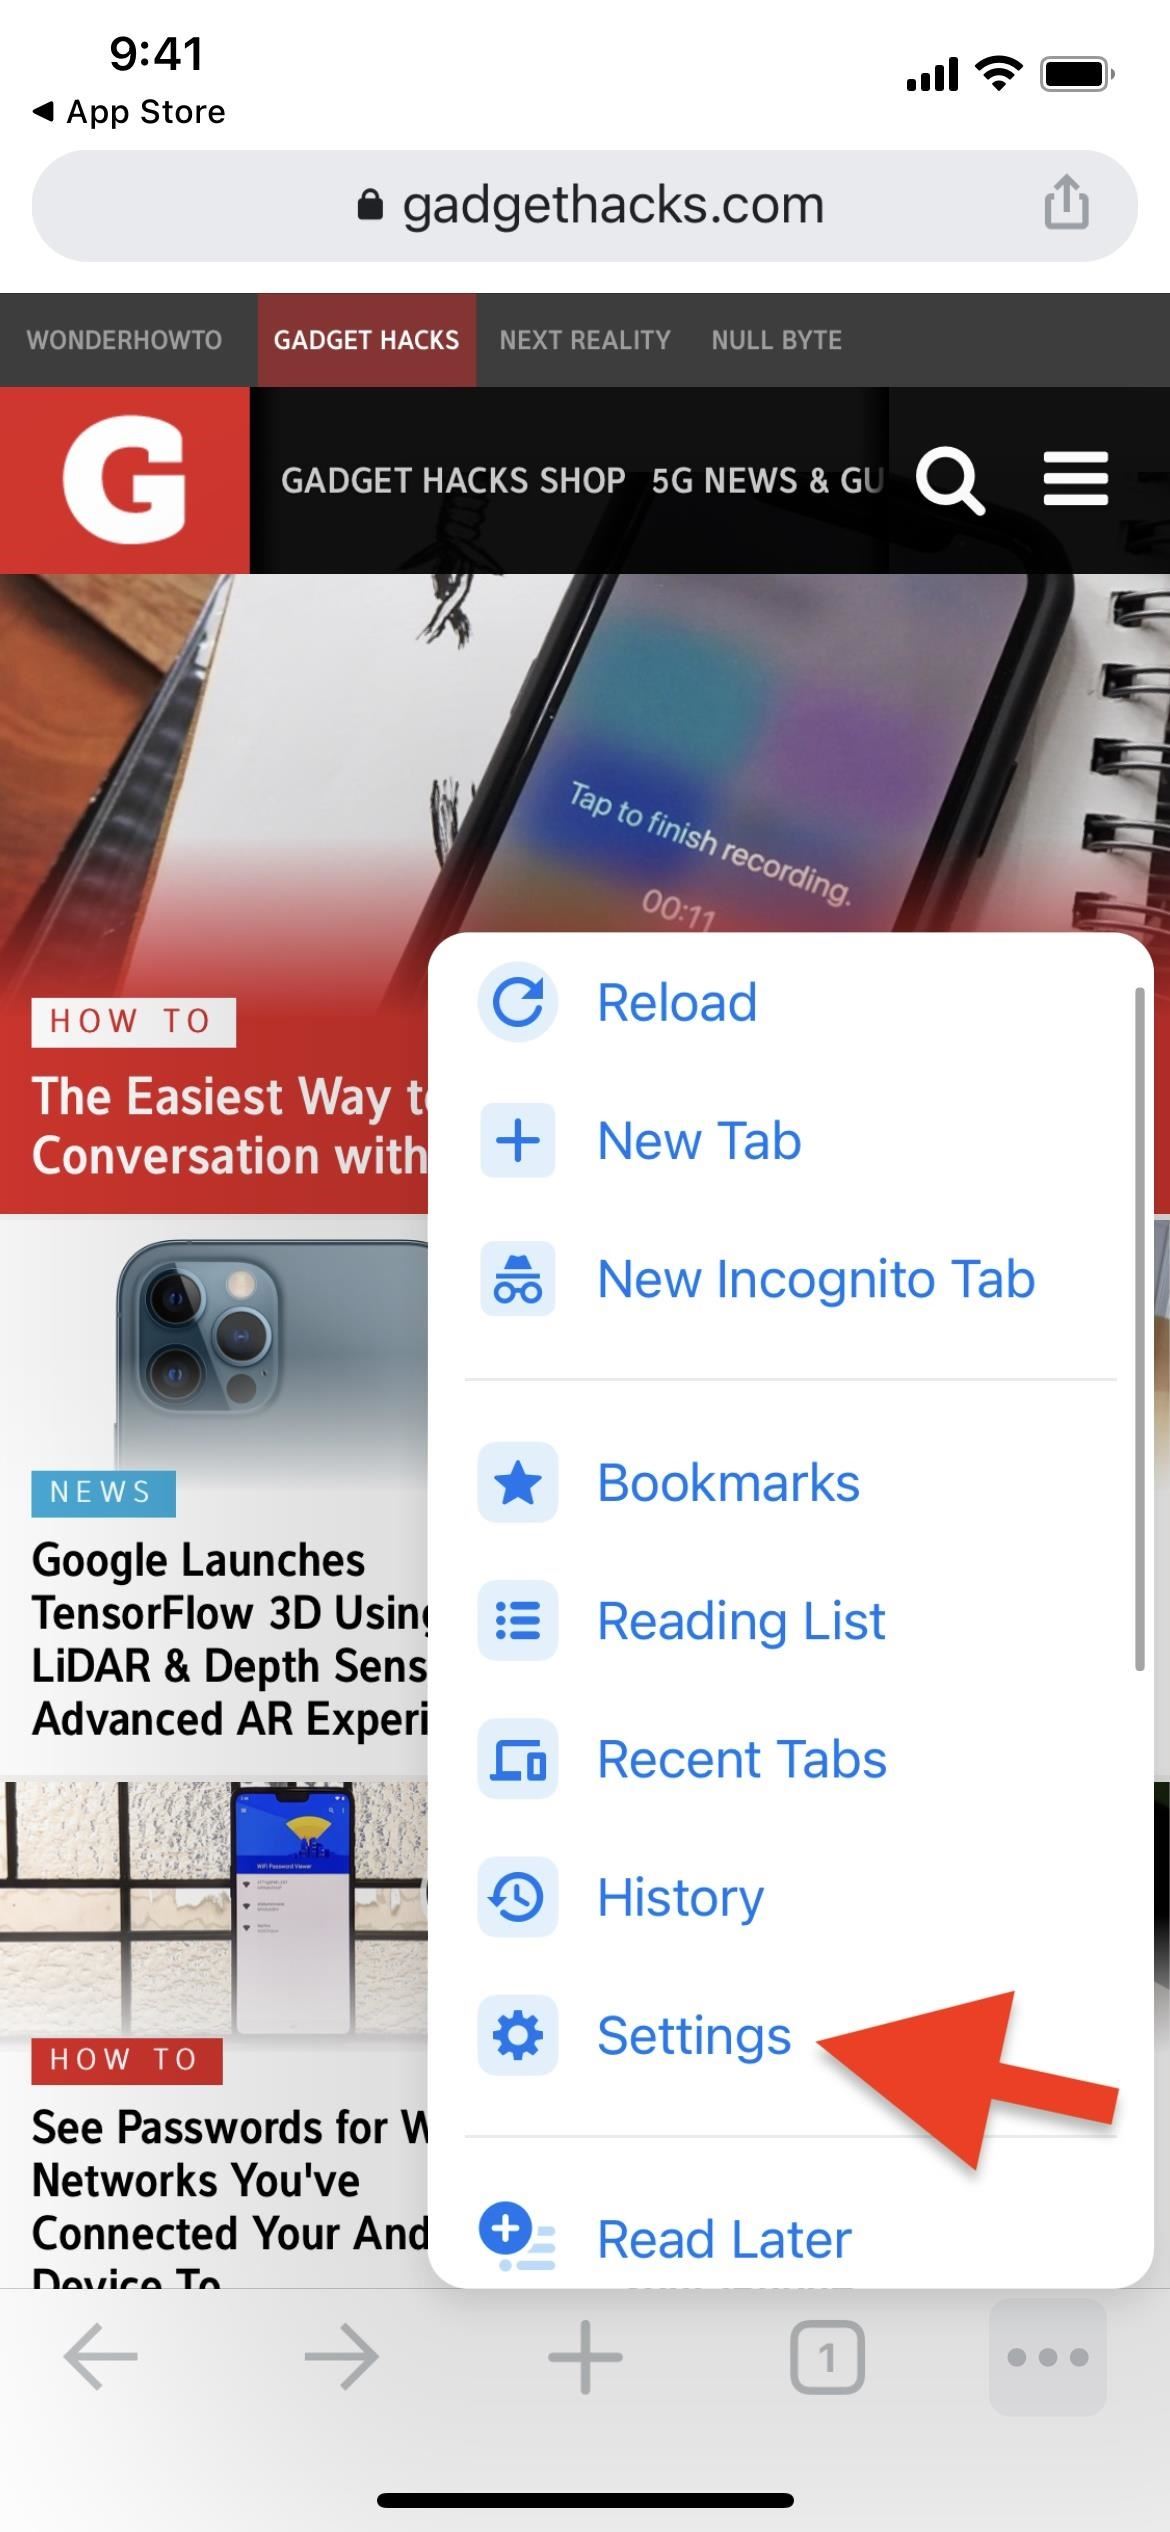 How to Lock All Your Incognito Tabs in Google Chrome Behind Face ID or Touch ID to Make Them Even More Private